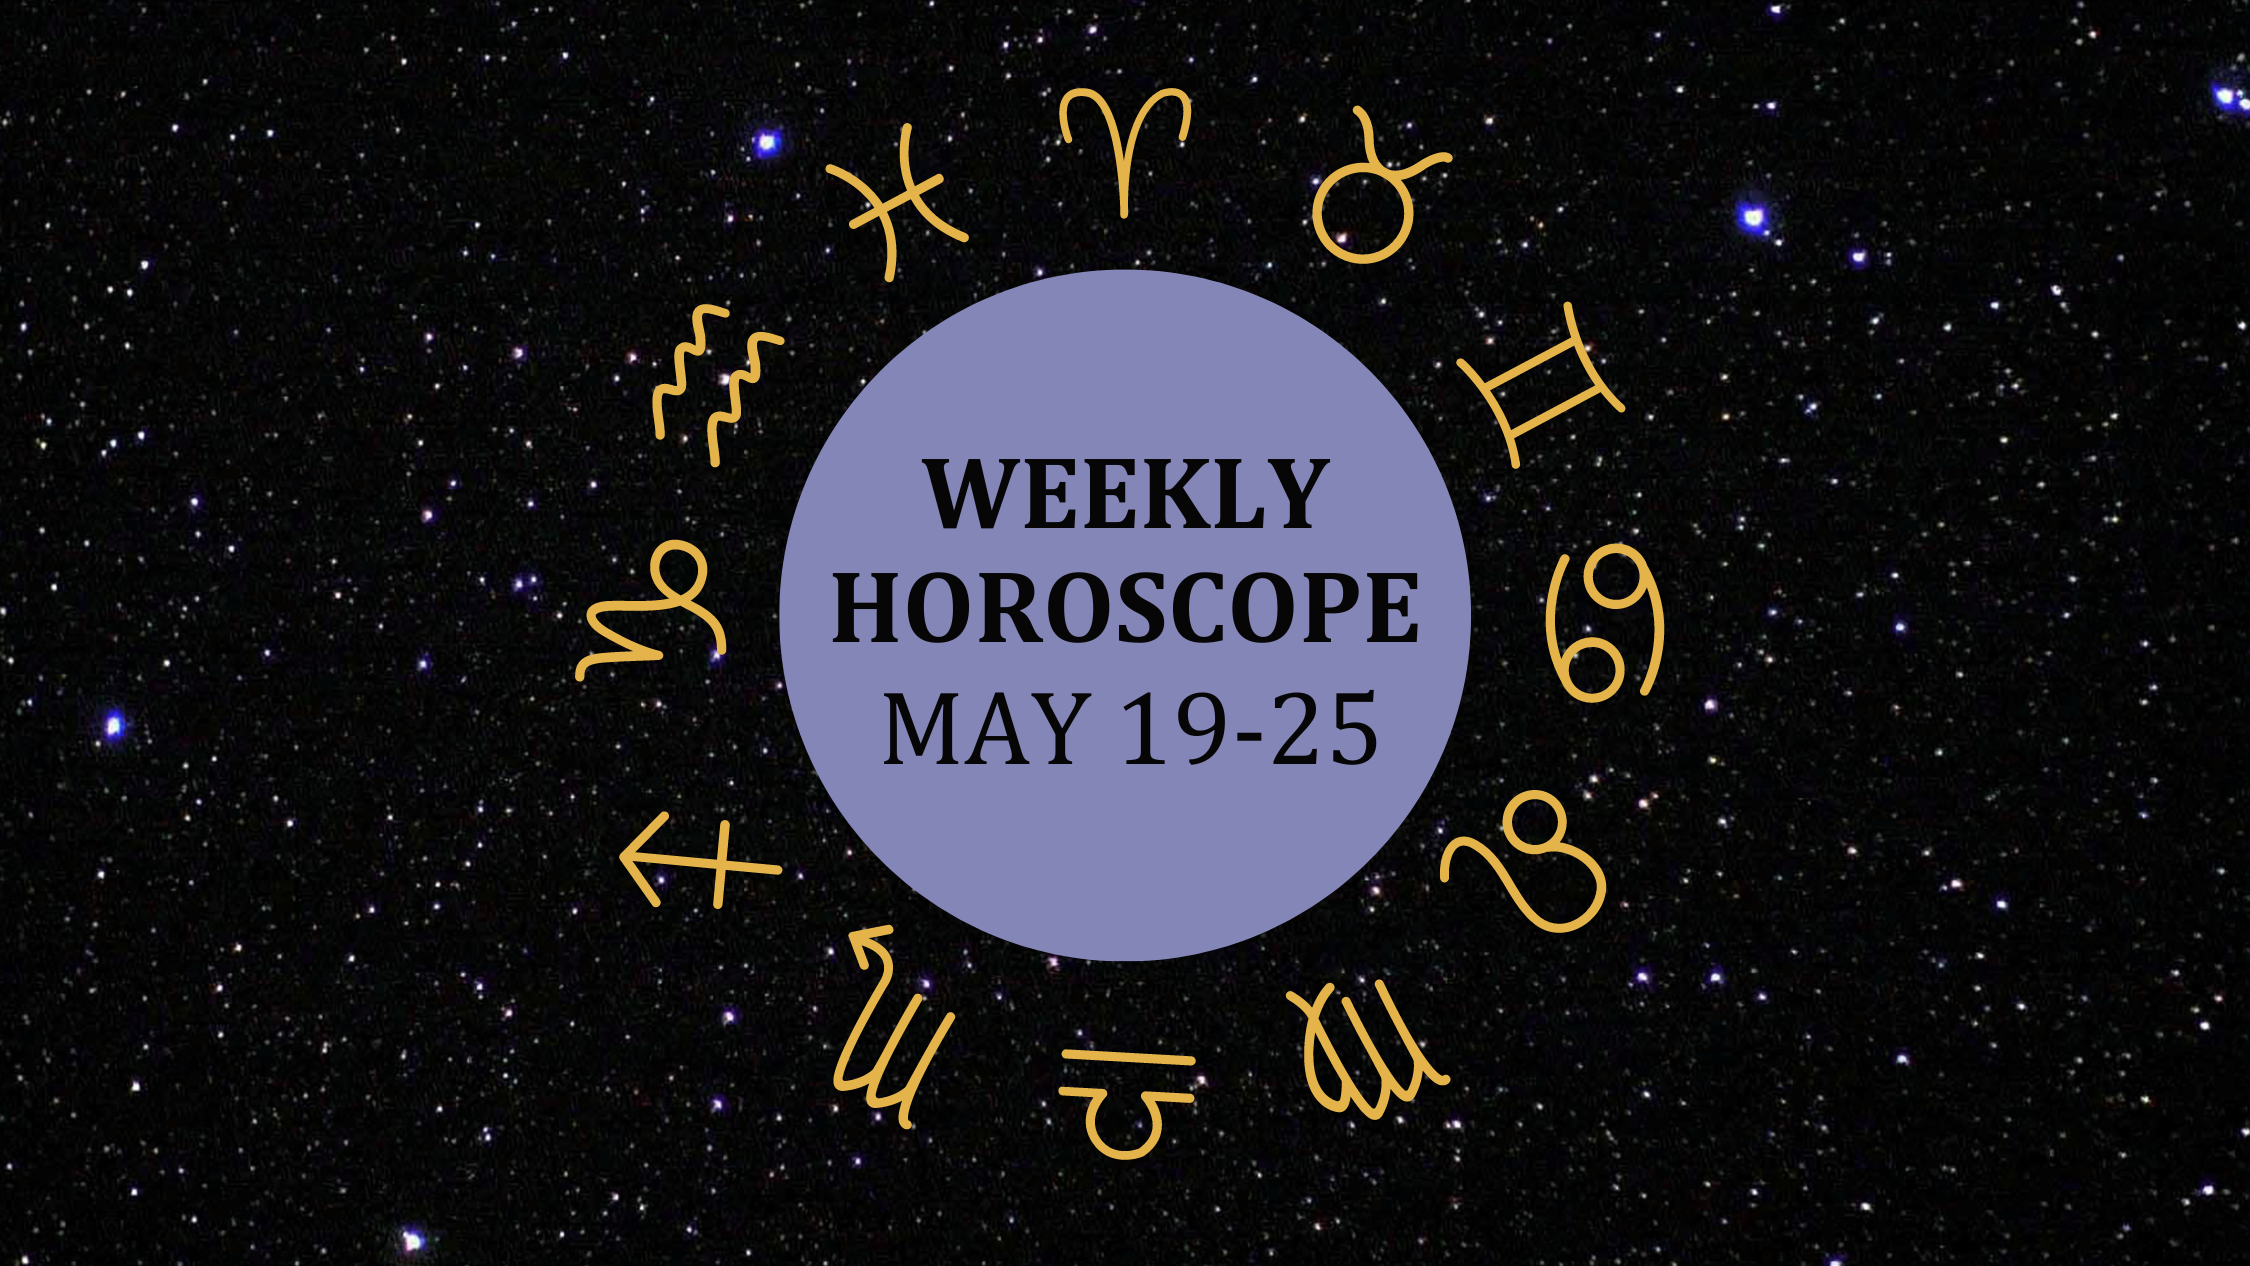 Zodiac wheel with text in the middle: "Weekly Horoscope: May 19-25"